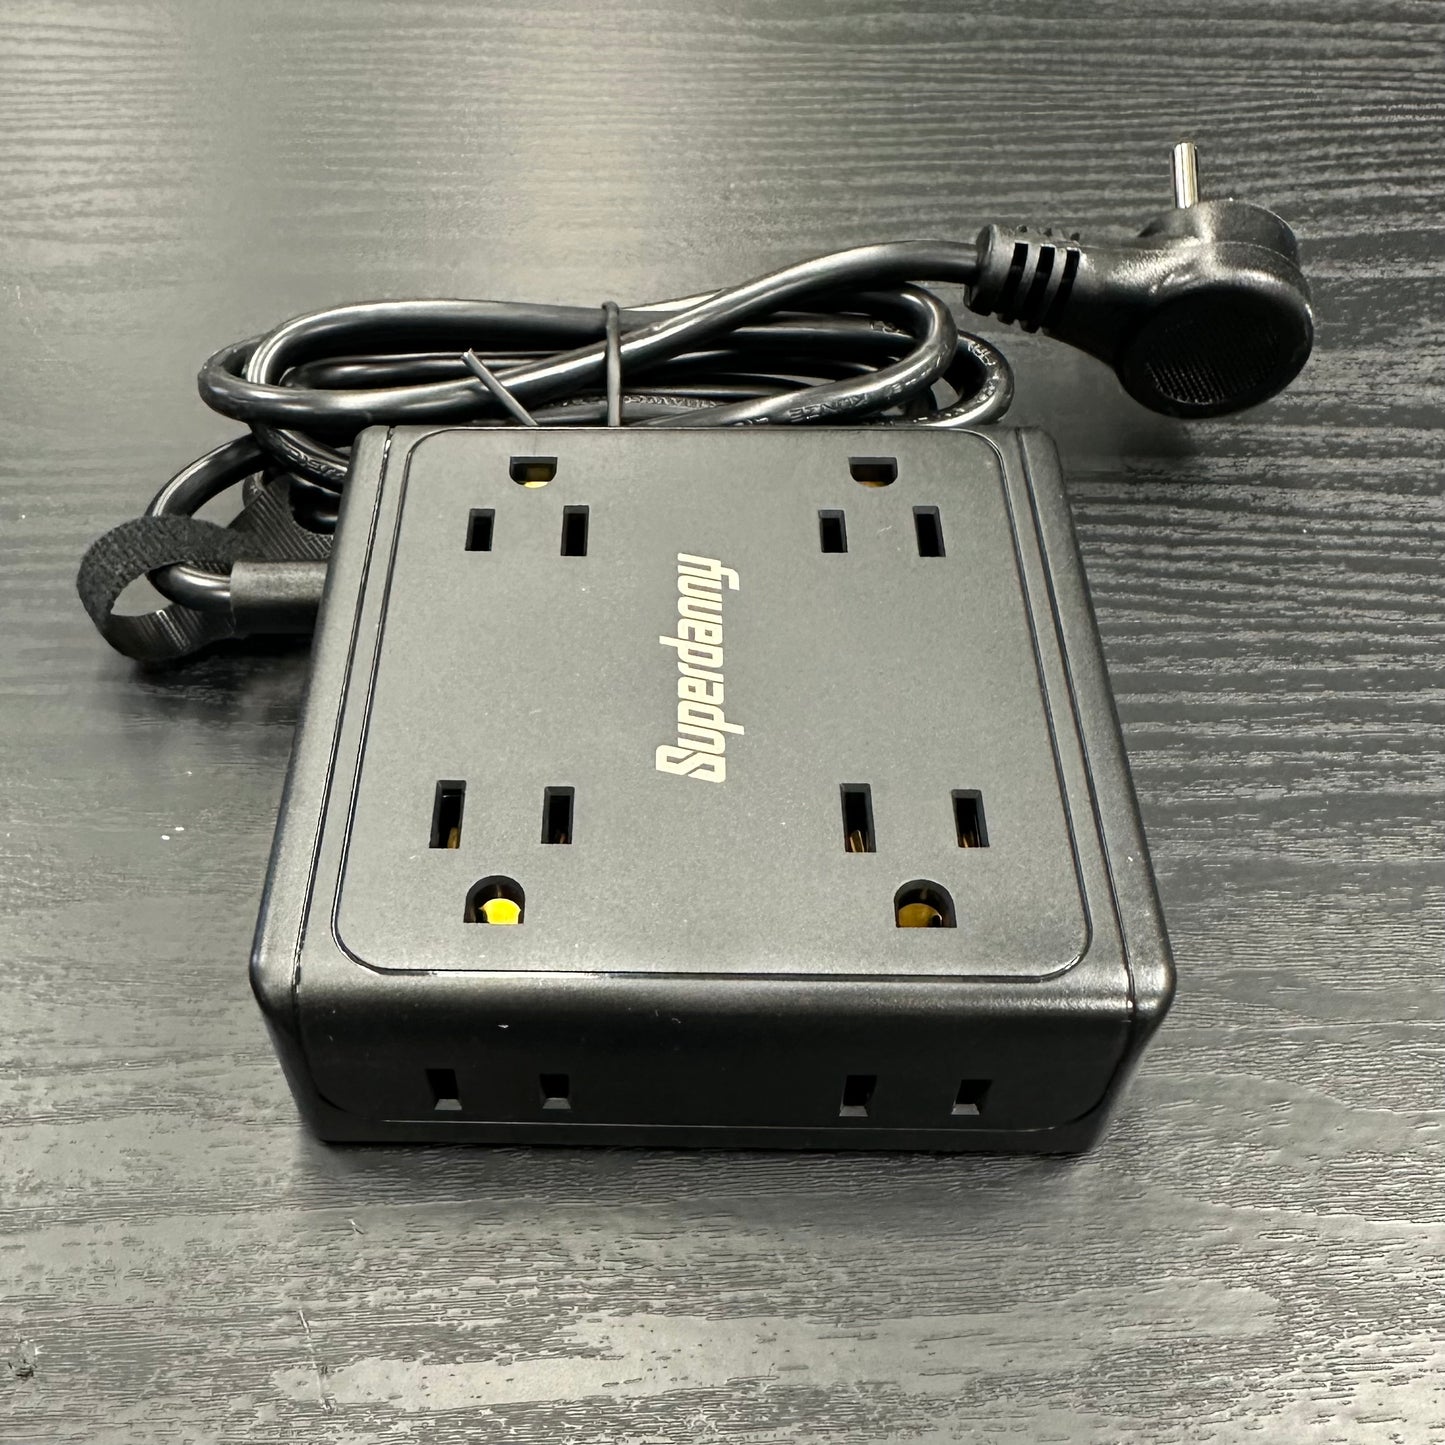 SUPERDANNY (12-in-1) Surge Protector Outlet & USB Power Bar